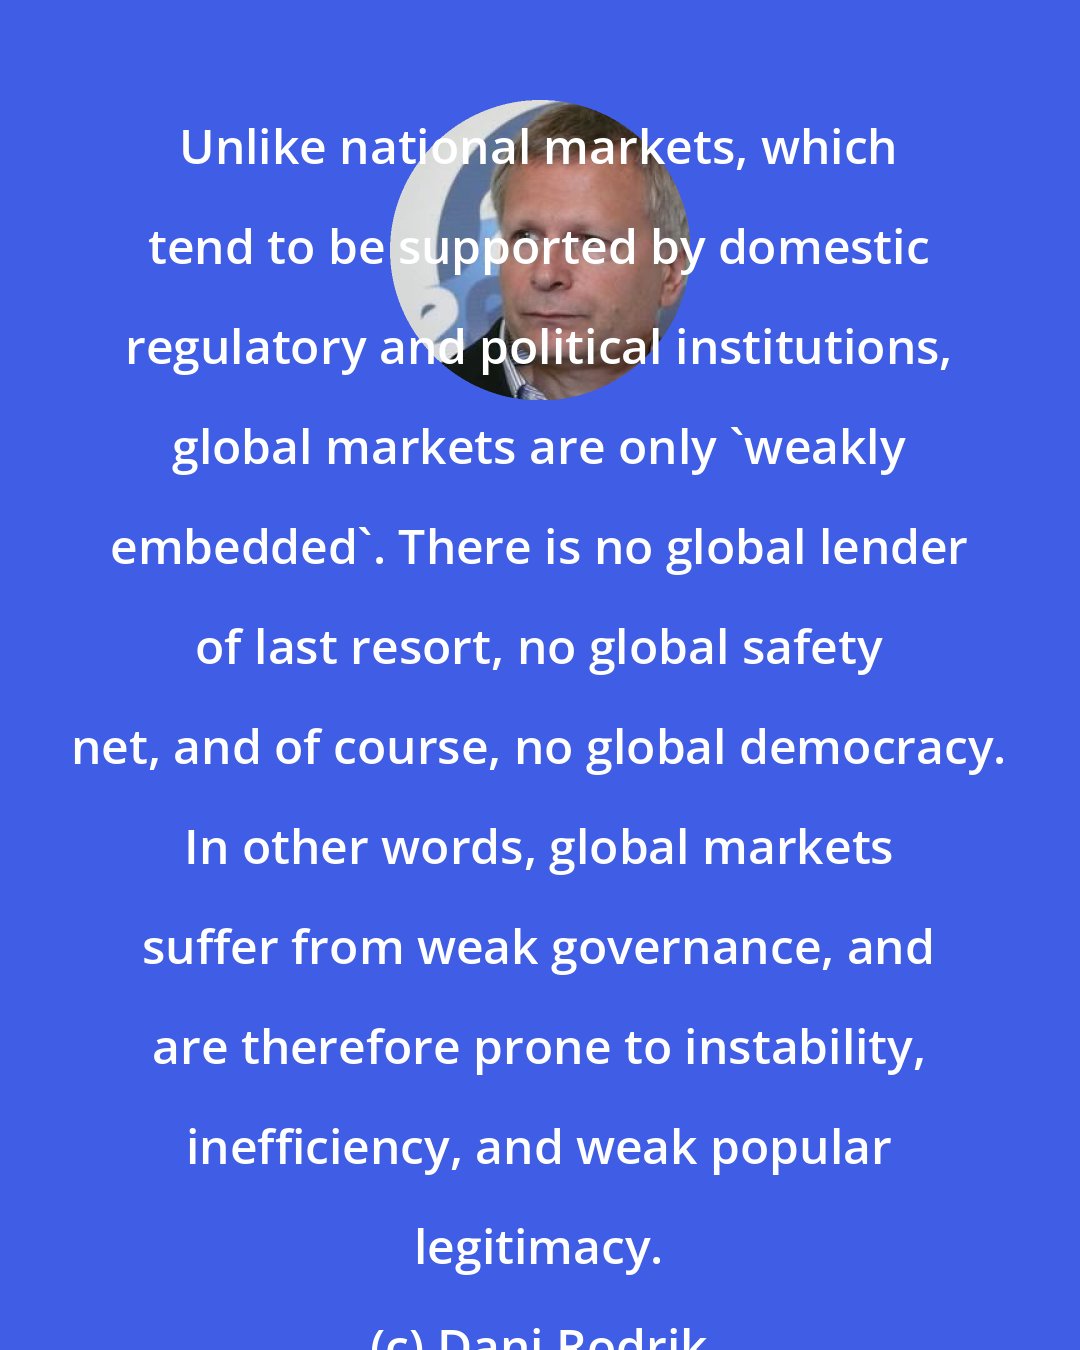 Dani Rodrik: Unlike national markets, which tend to be supported by domestic regulatory and political institutions, global markets are only 'weakly embedded'. There is no global lender of last resort, no global safety net, and of course, no global democracy. In other words, global markets suffer from weak governance, and are therefore prone to instability, inefficiency, and weak popular legitimacy.